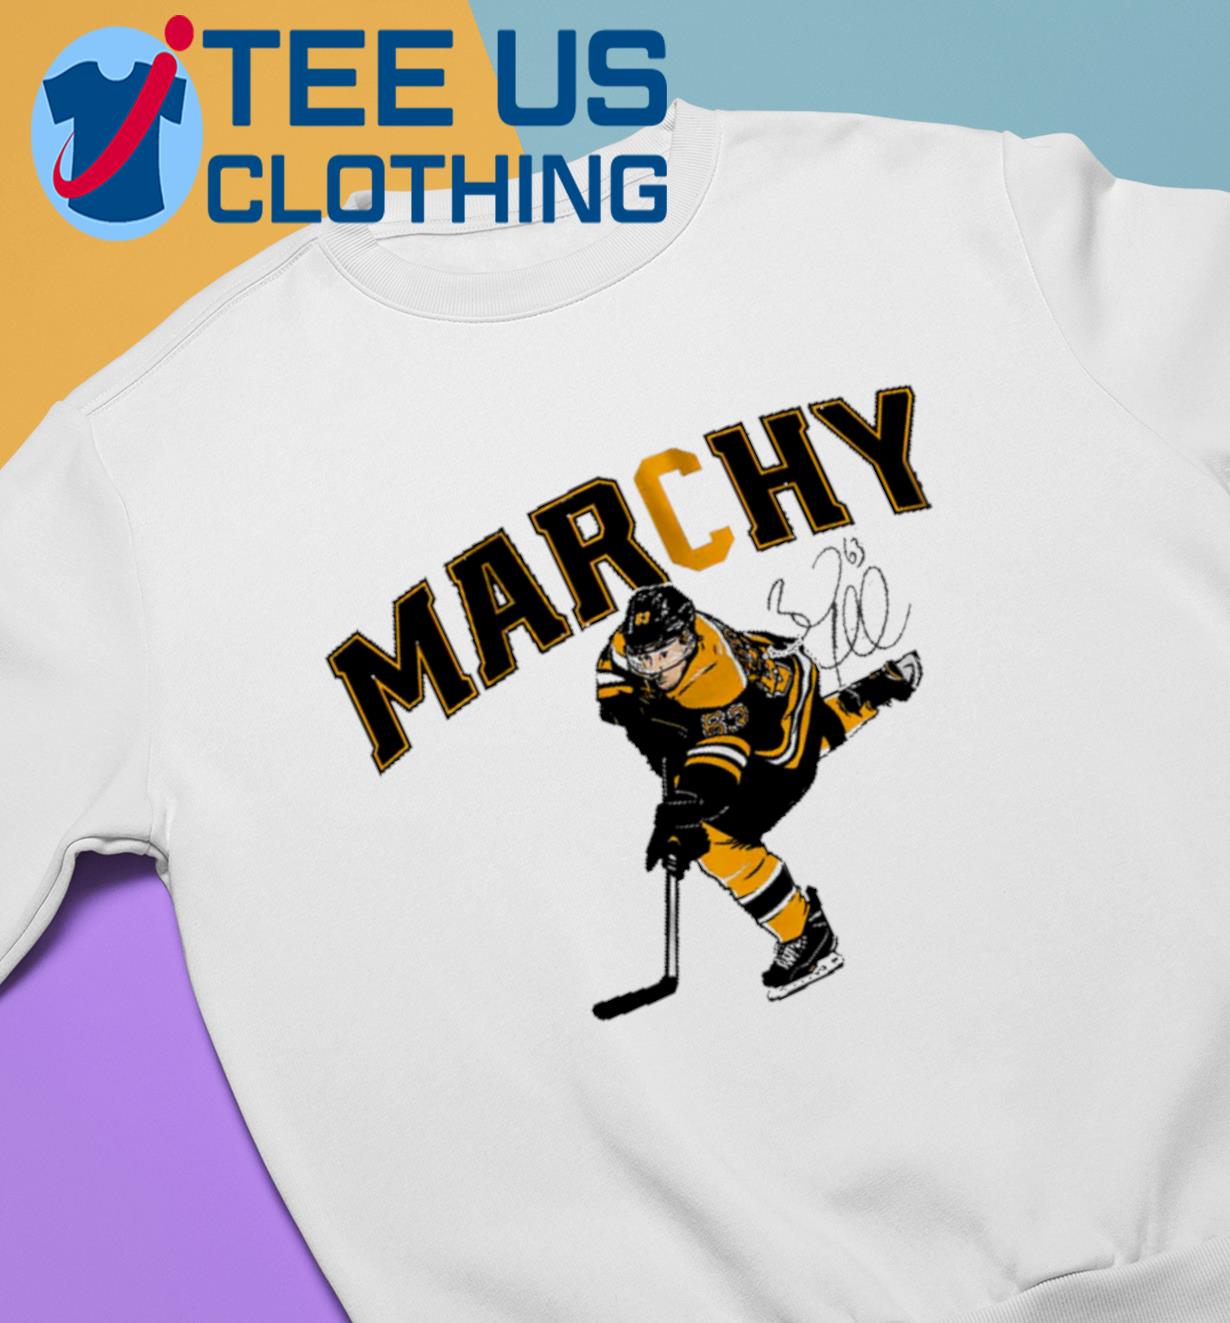 Brad Marchand Captain Marchy Shirt